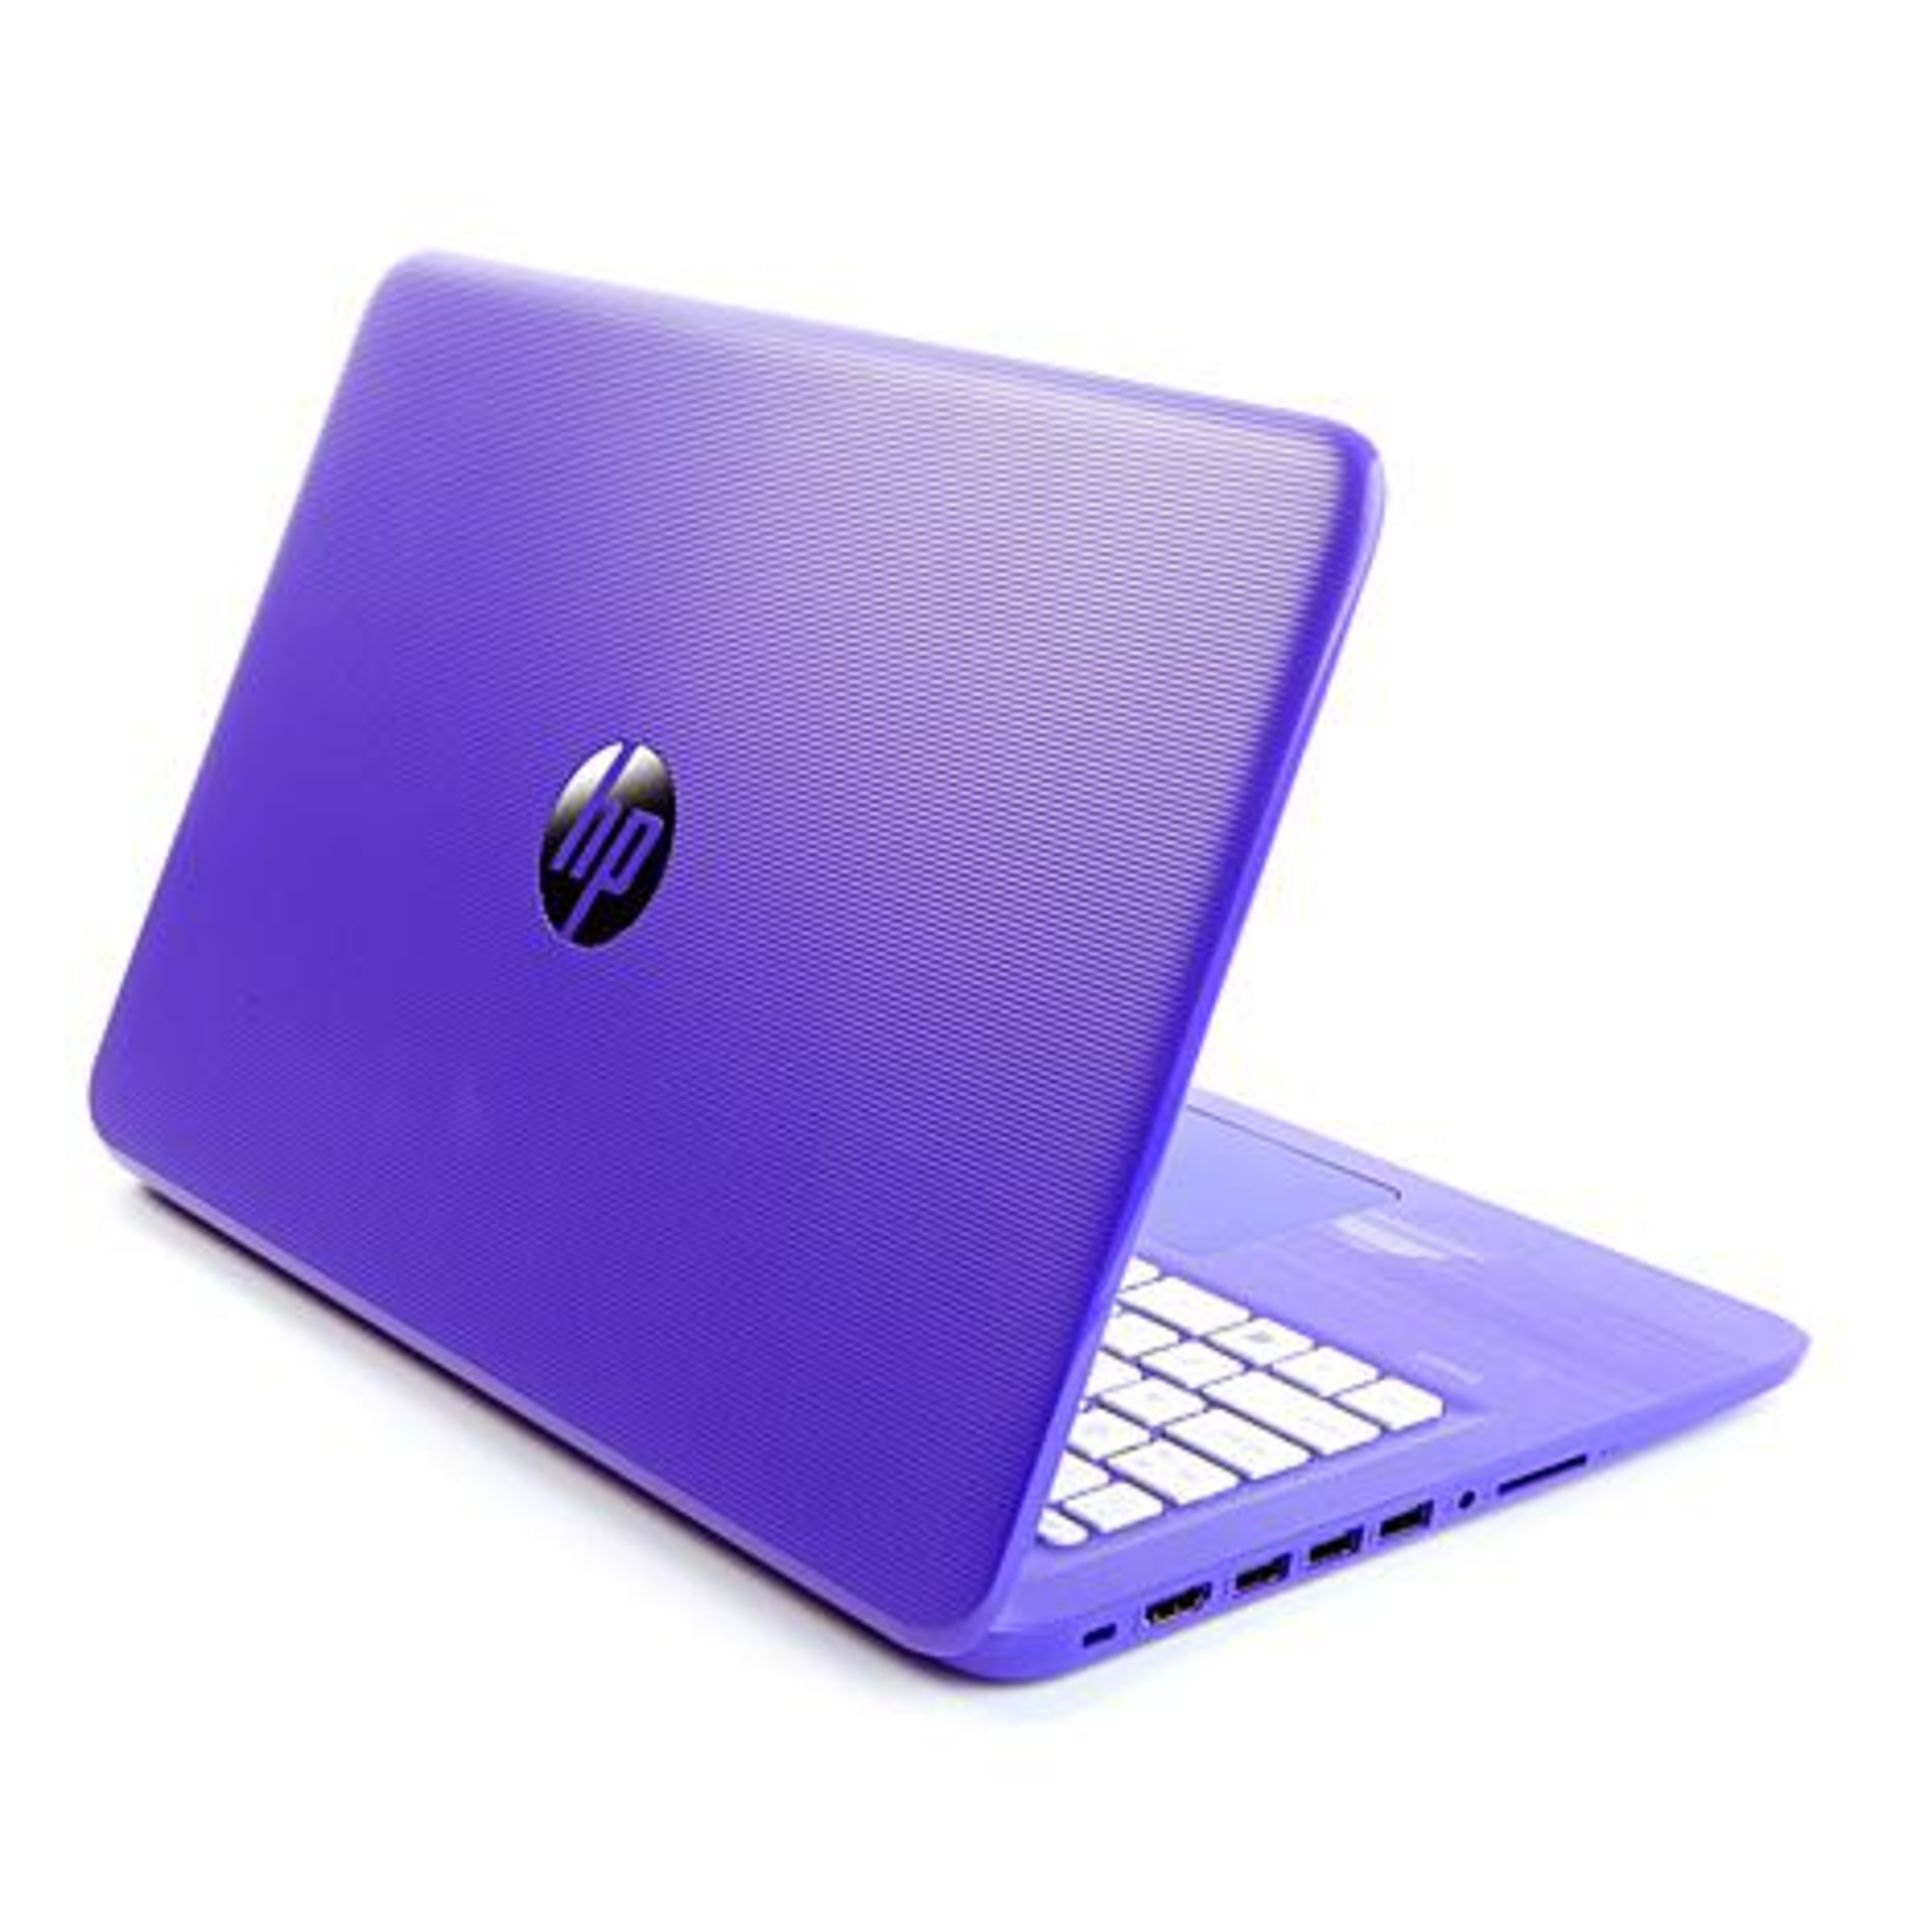 V Grade A HP Violet Purple Stream Ultra Thin 14-ax002na With Windows 10 Home - 1.6Ghz Intel - Image 4 of 4